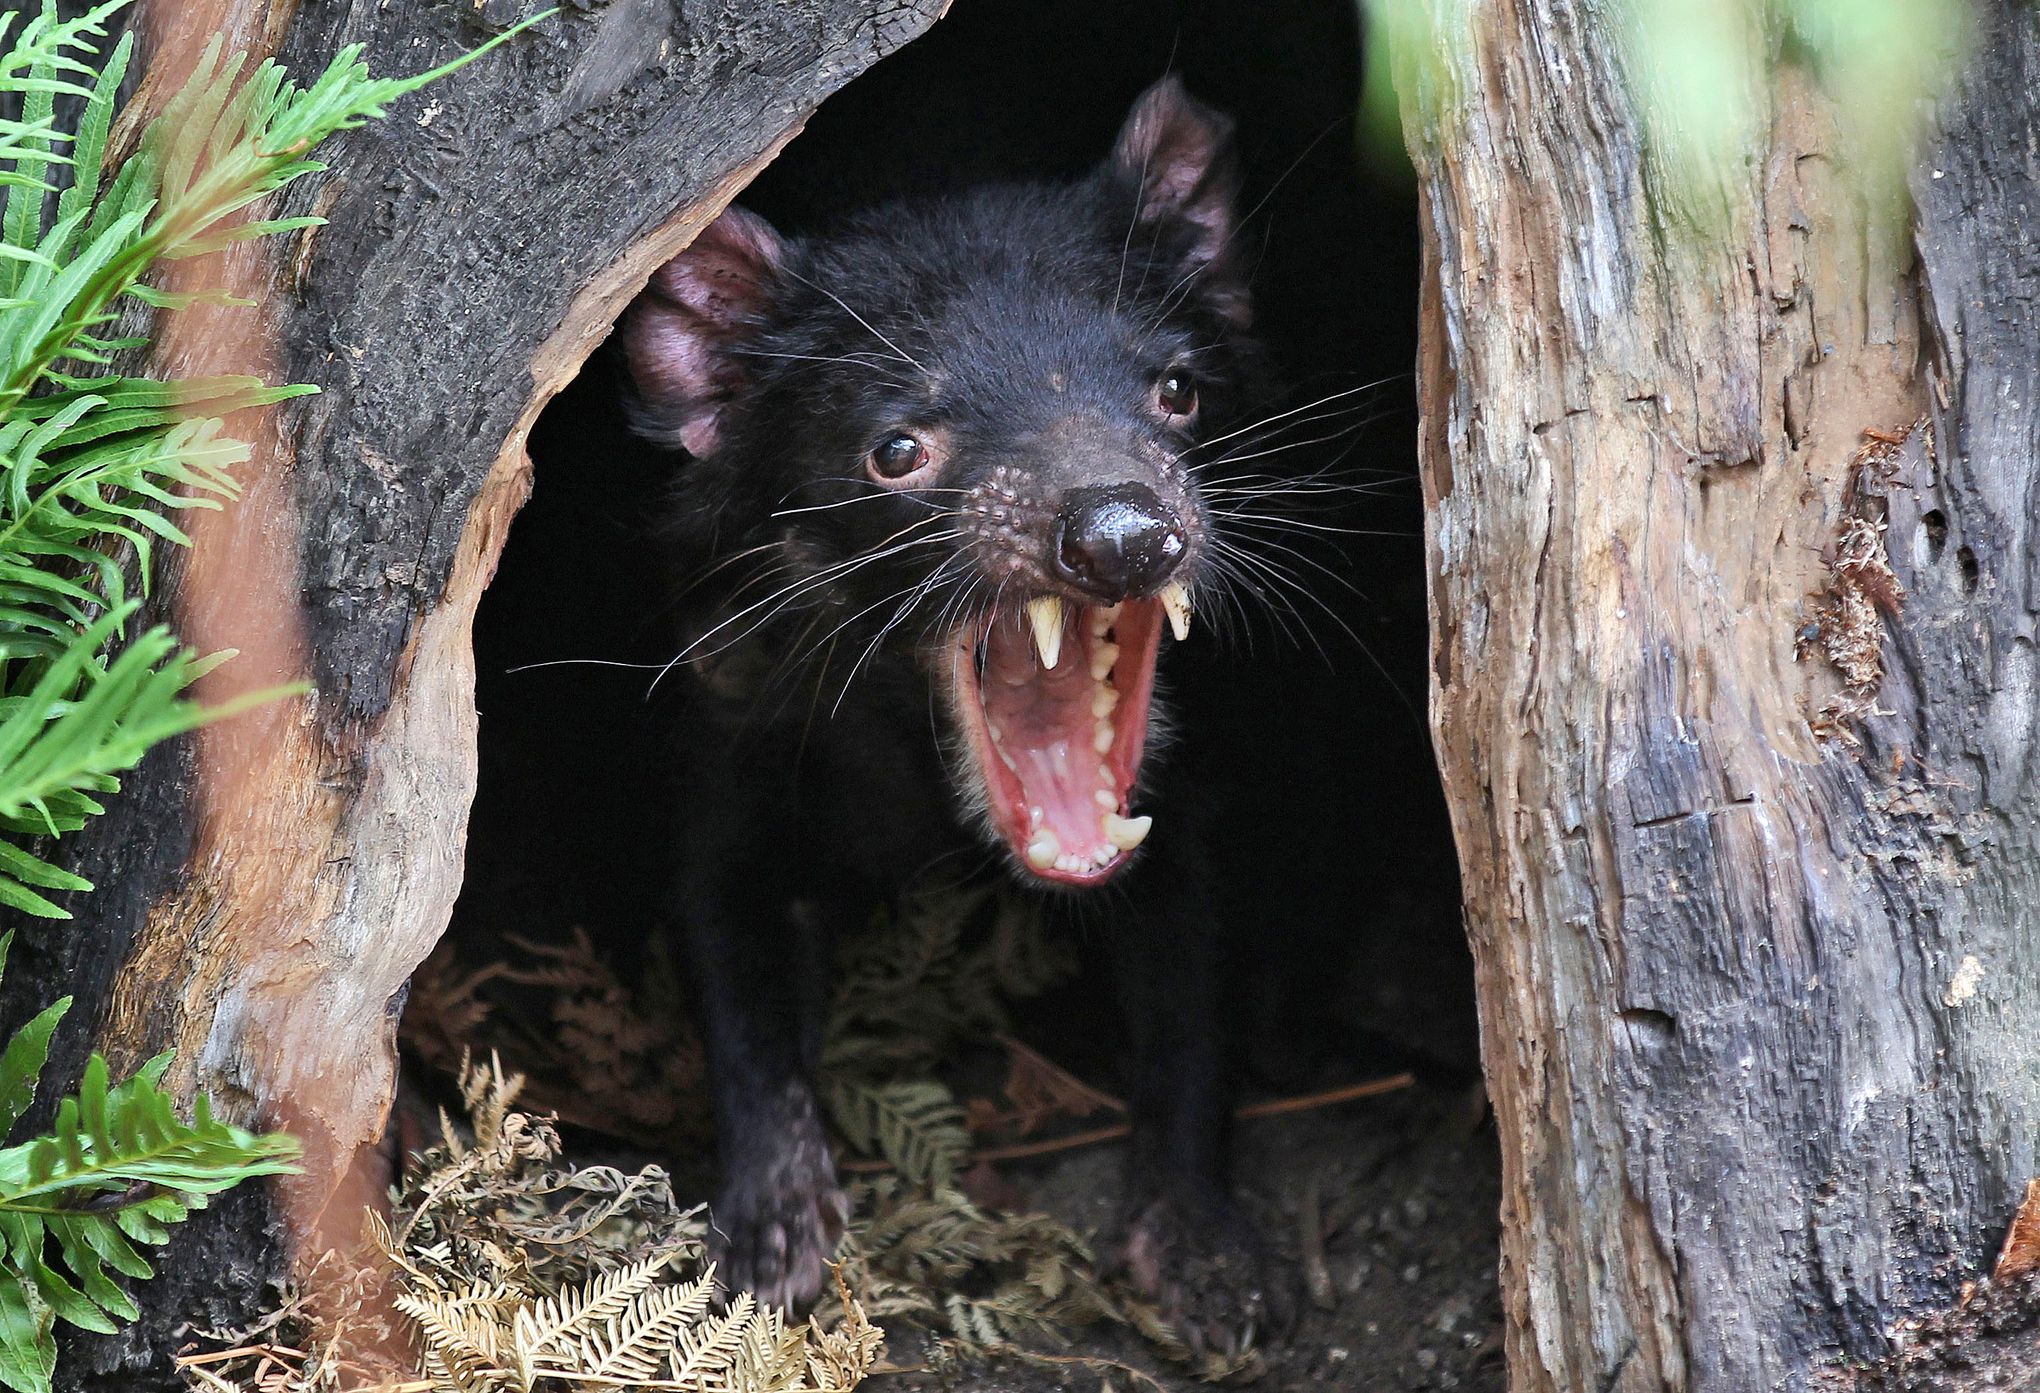 Tasmanian devils are passing on 'contagious' CANCER when they bite